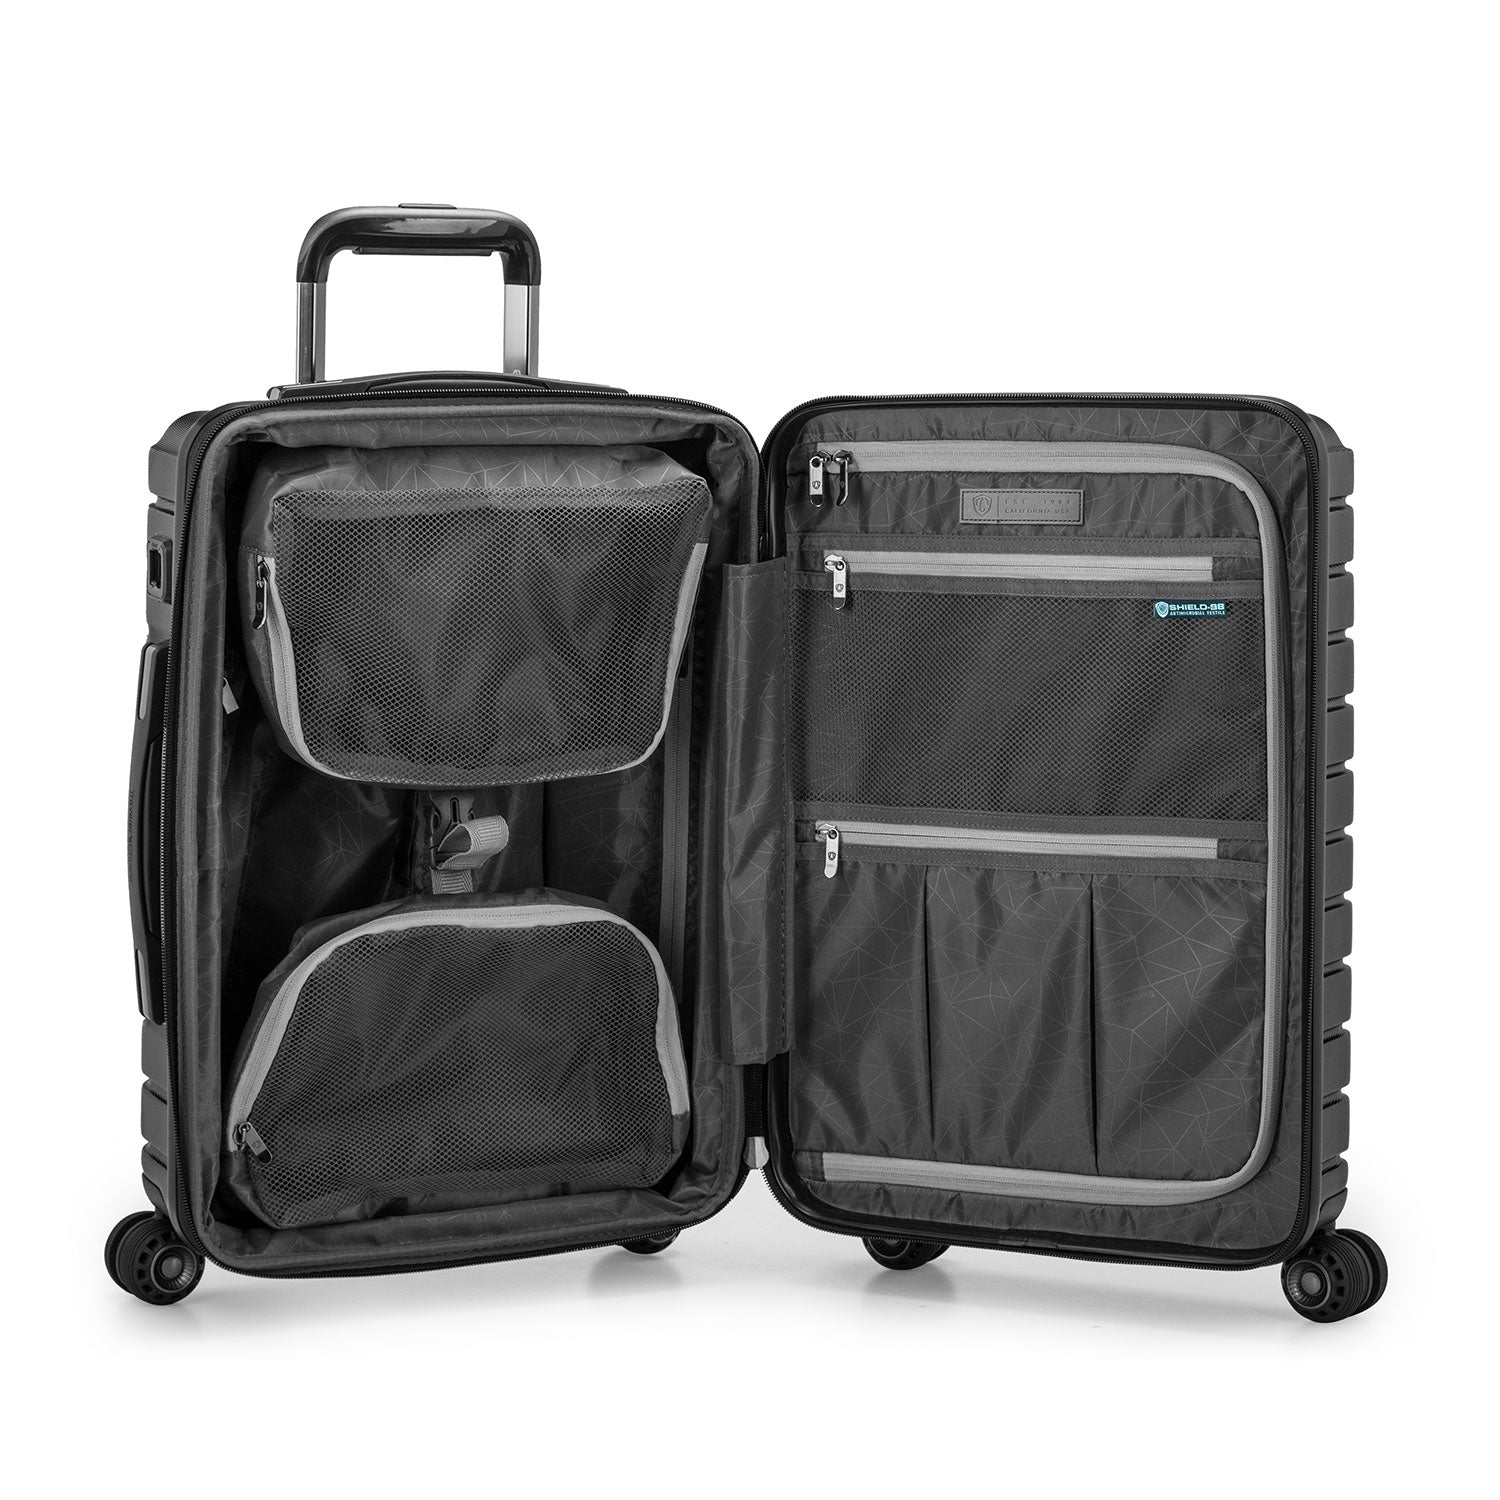 Archer Carry-On 4 Wheel Spinner Luggage Suitcase Piece w/ USB Port